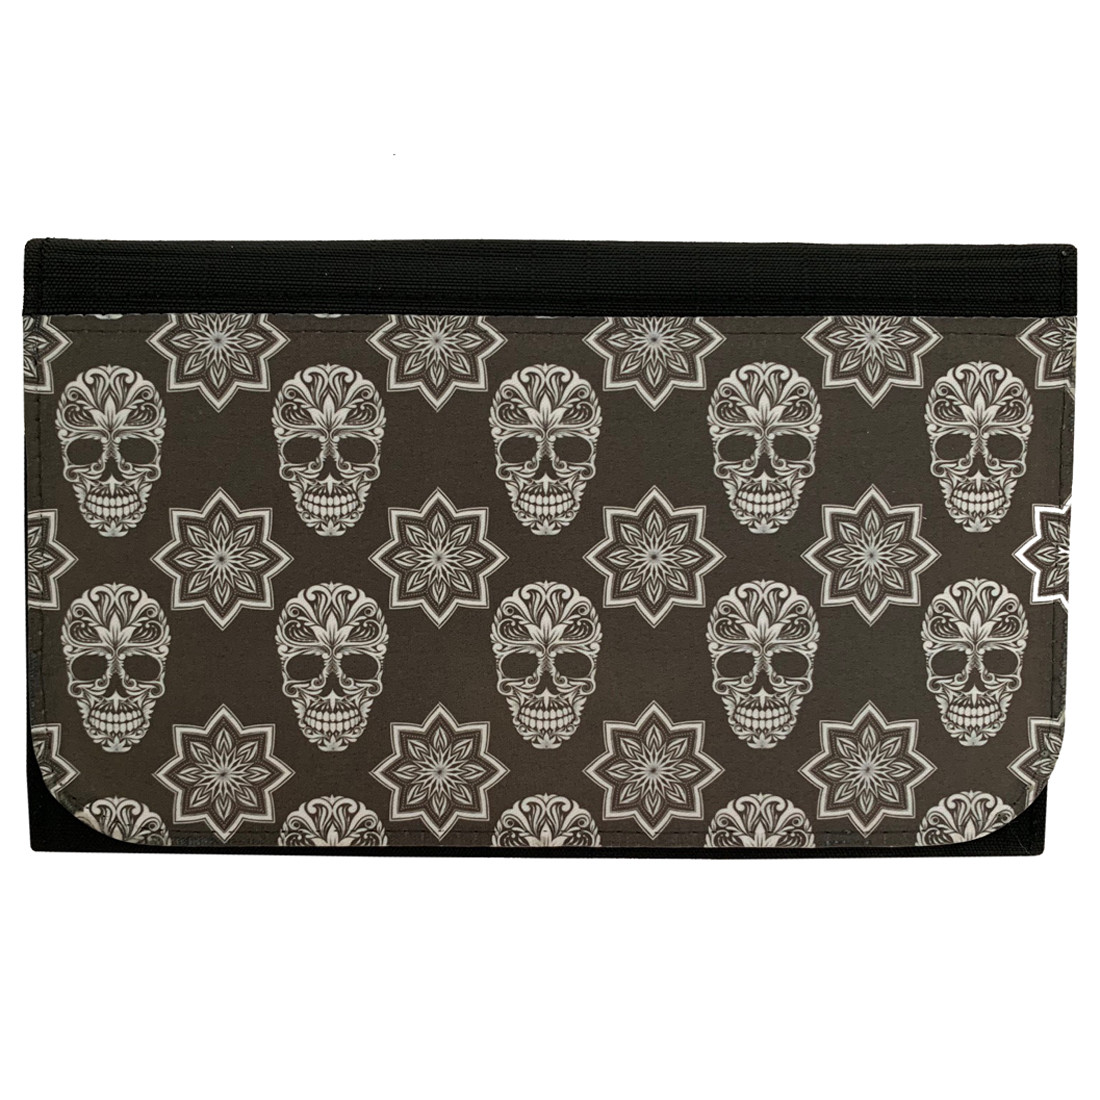 Black and White Sugar Skull Women's Wallet Black Poly Canvas Clutch